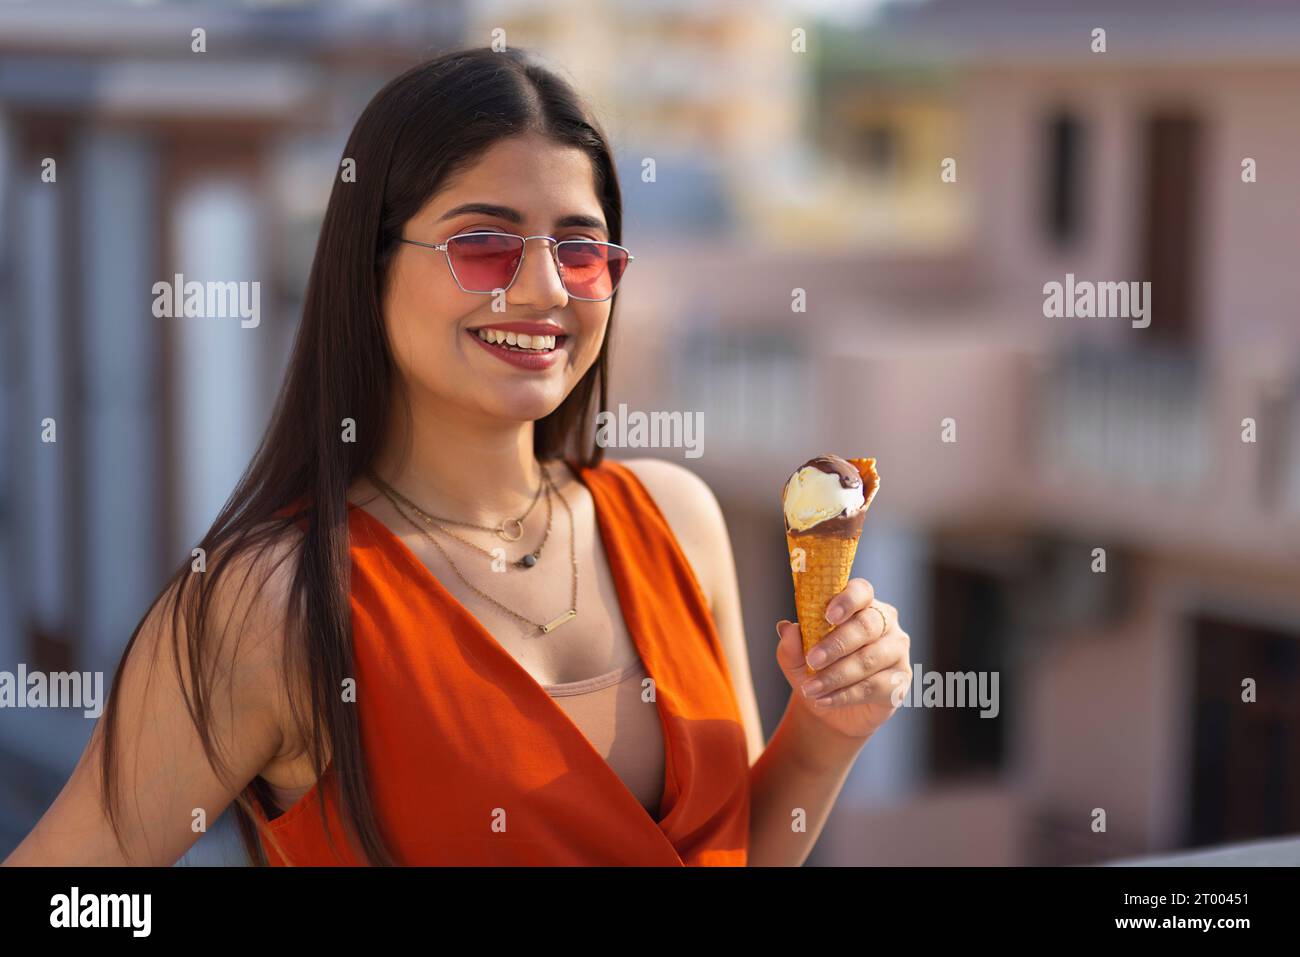 Portrait of young woman eating ice cream in cone Stock Photo